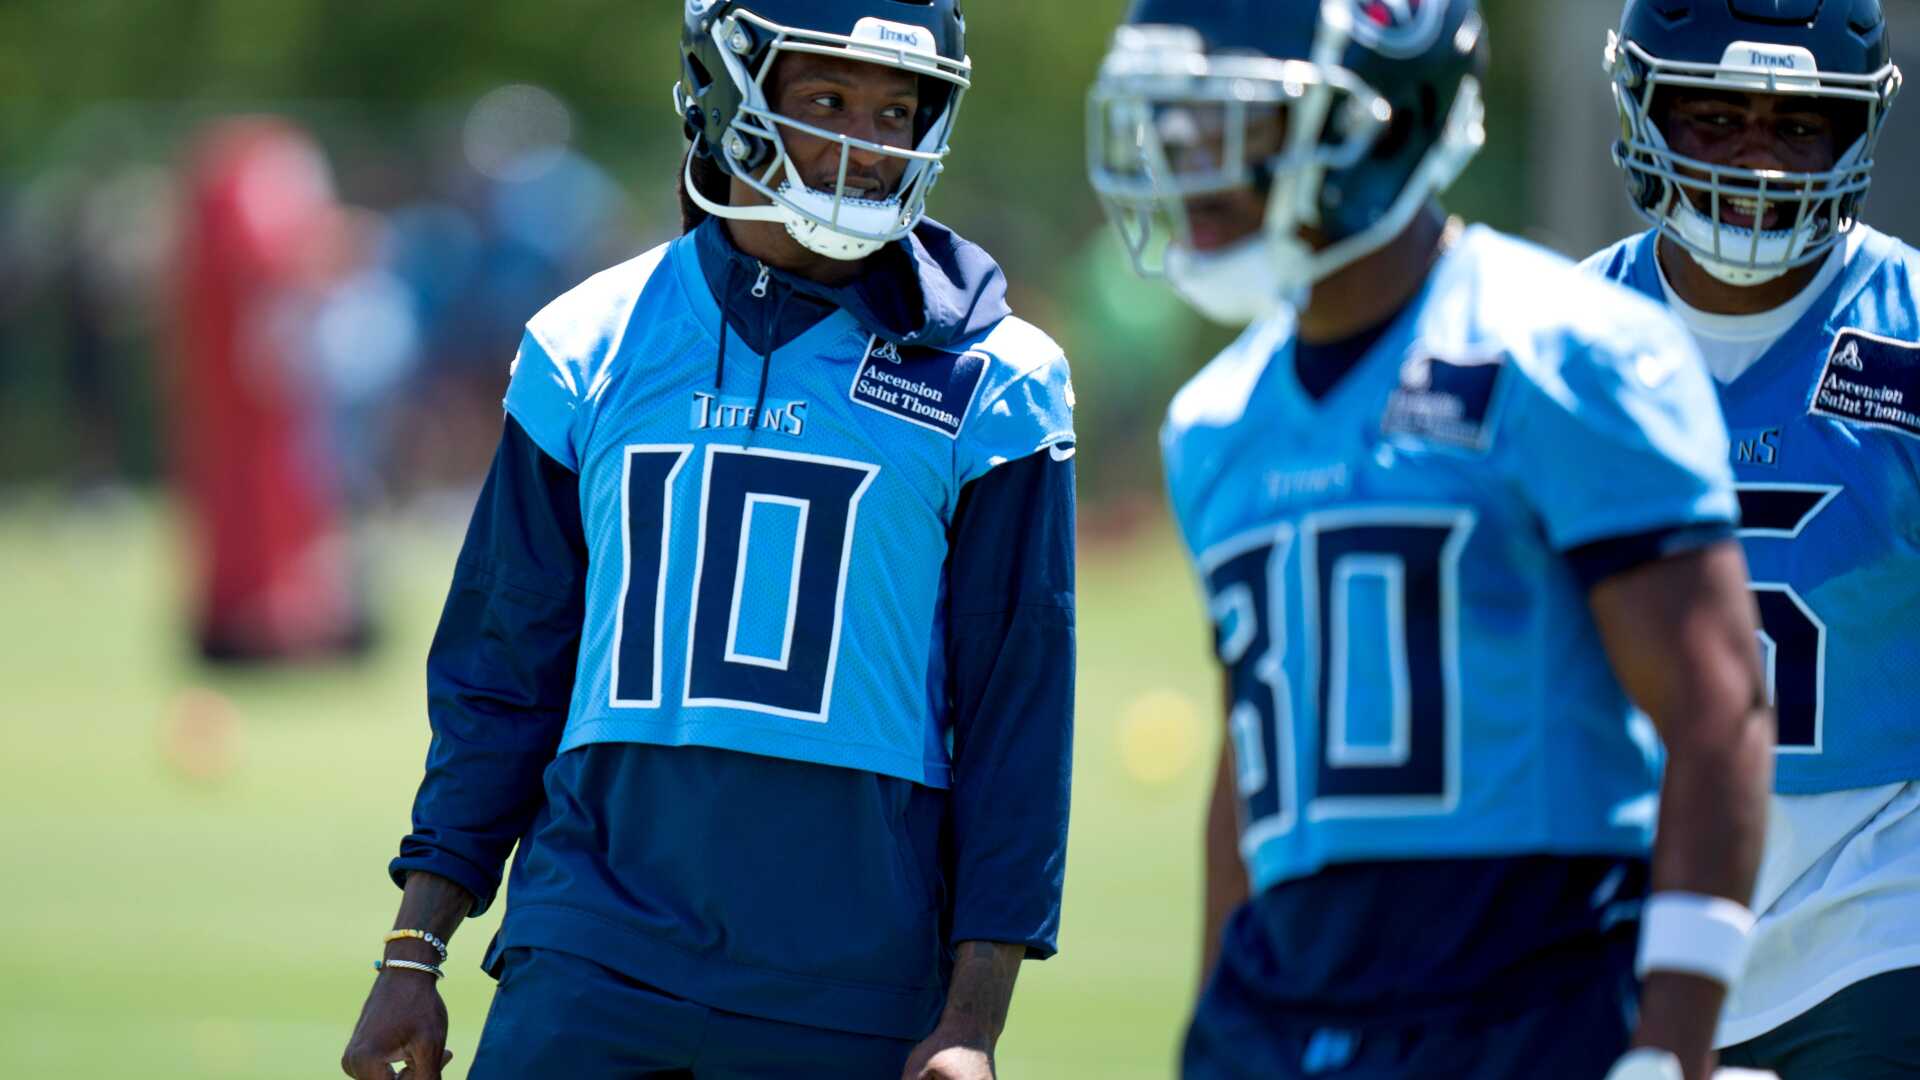 DeAndre Hopkins: Titans have one of the best wide receiver groups I've played with